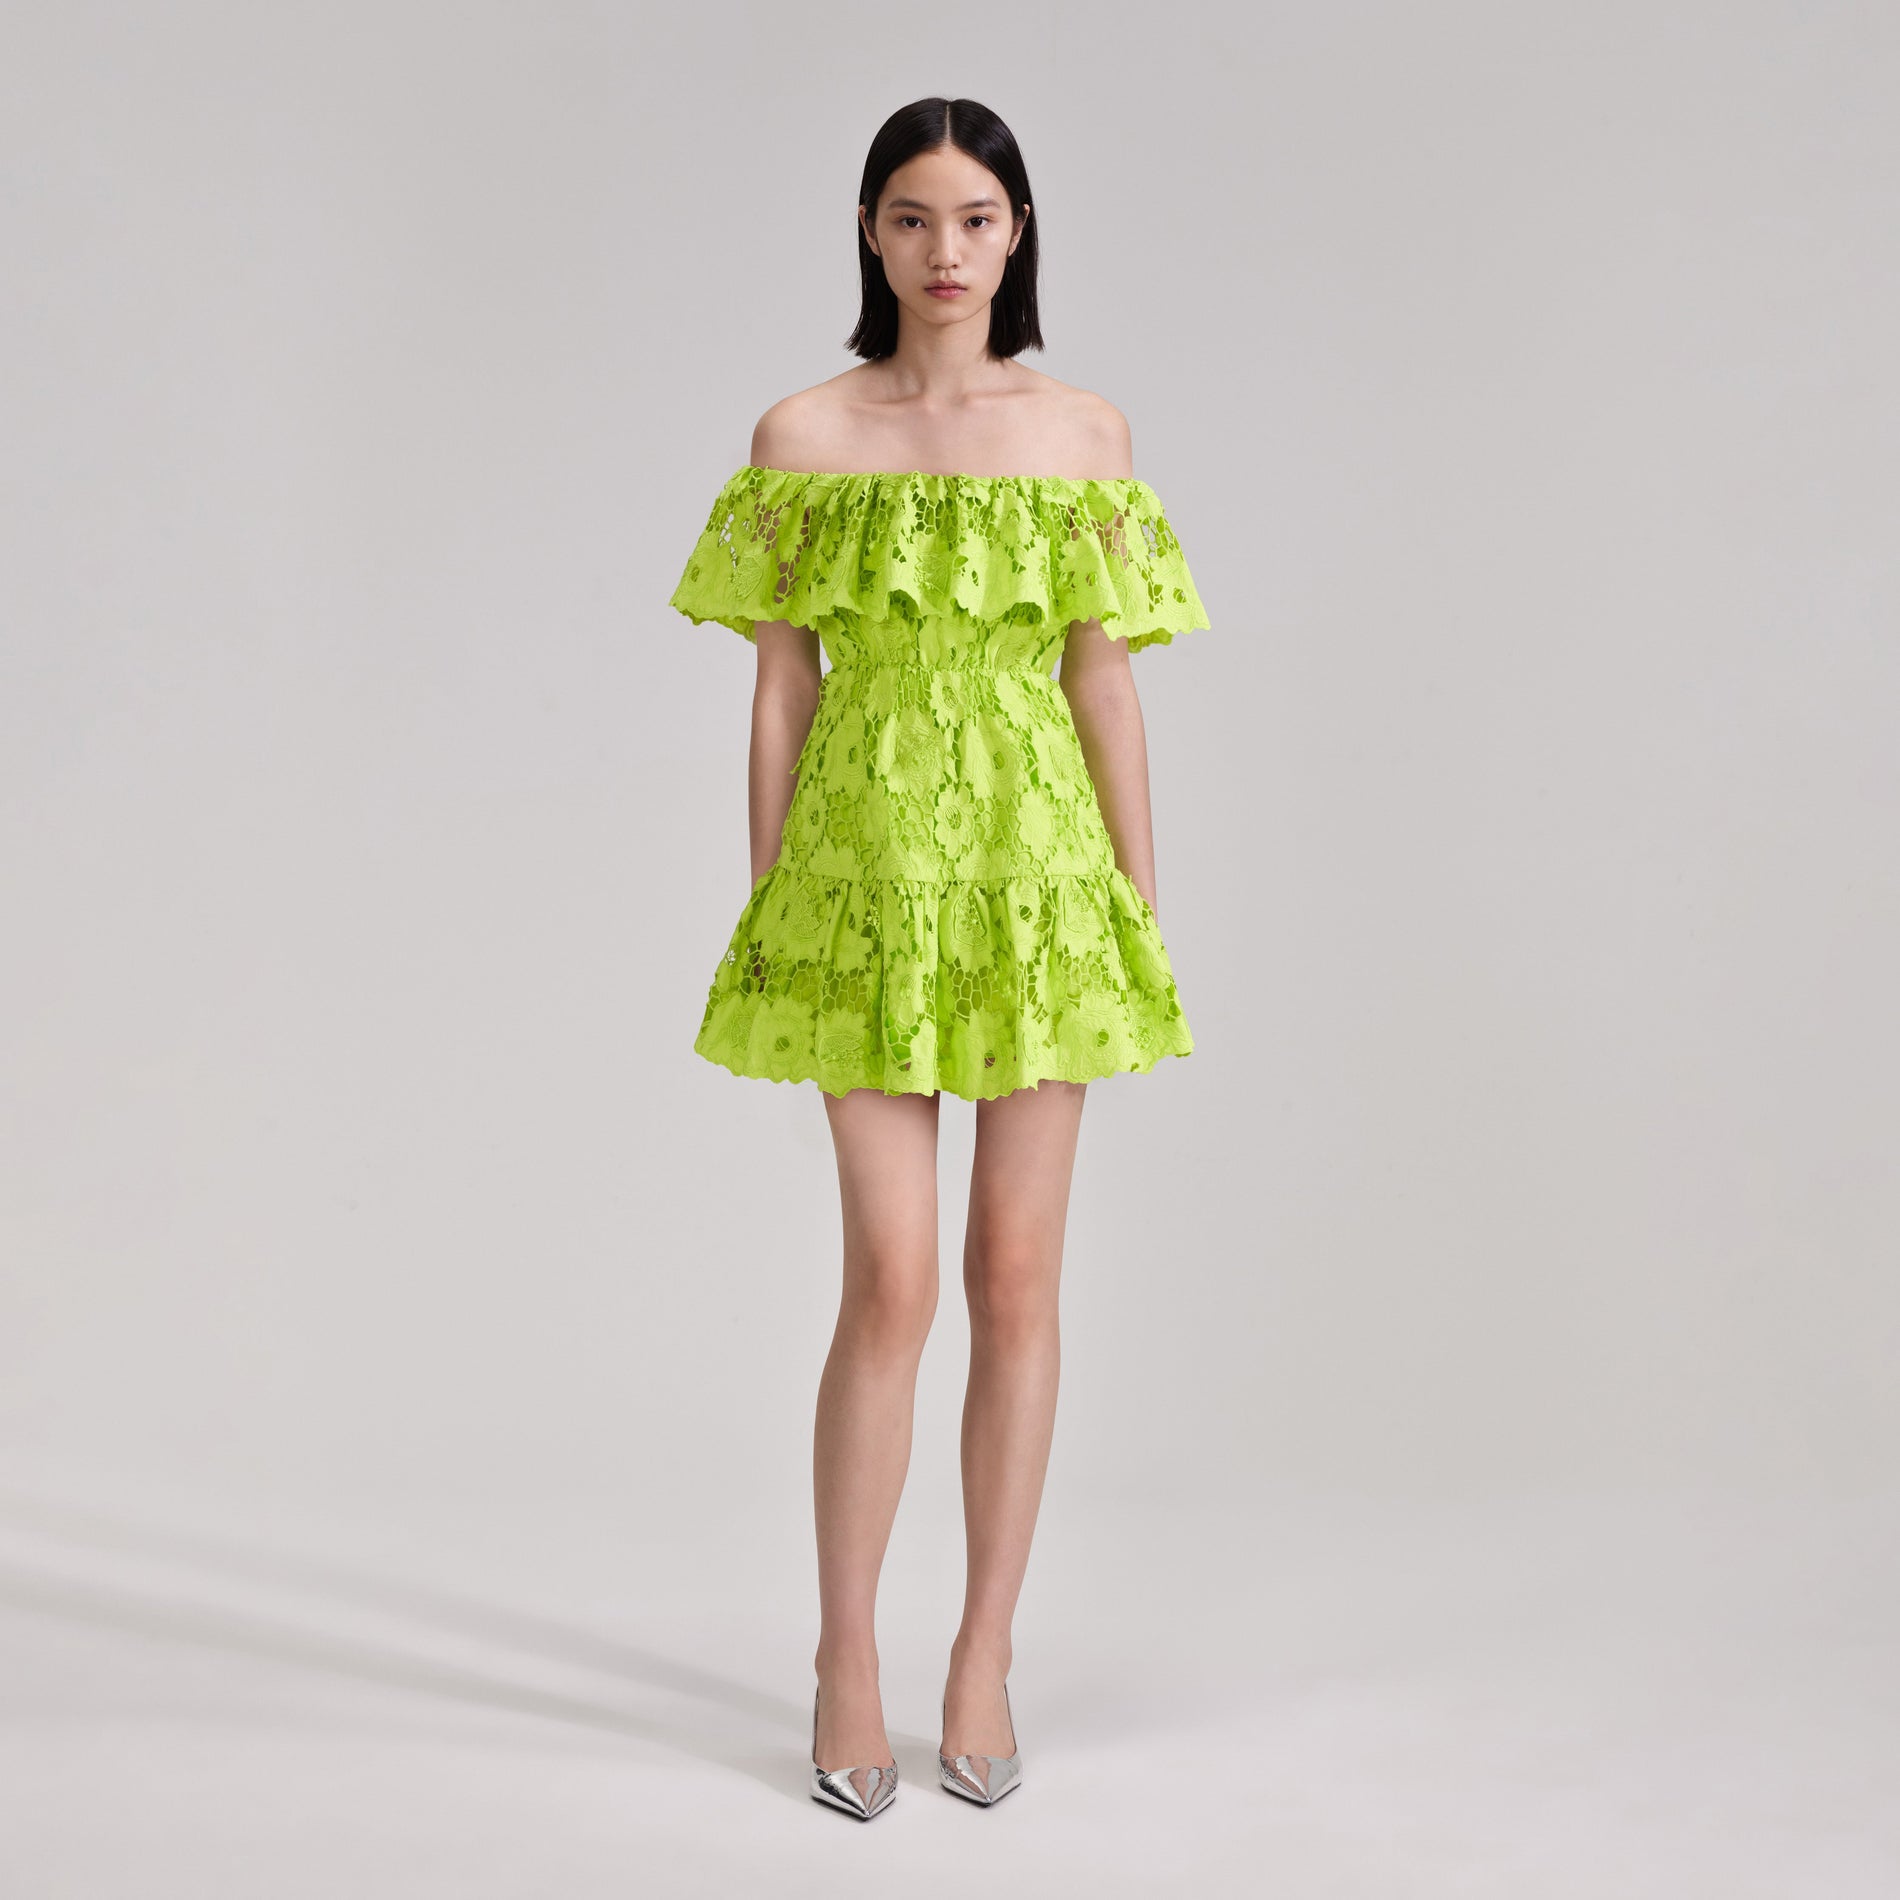 A woman wearing the Green Lace Off Shoulder Mini Dress